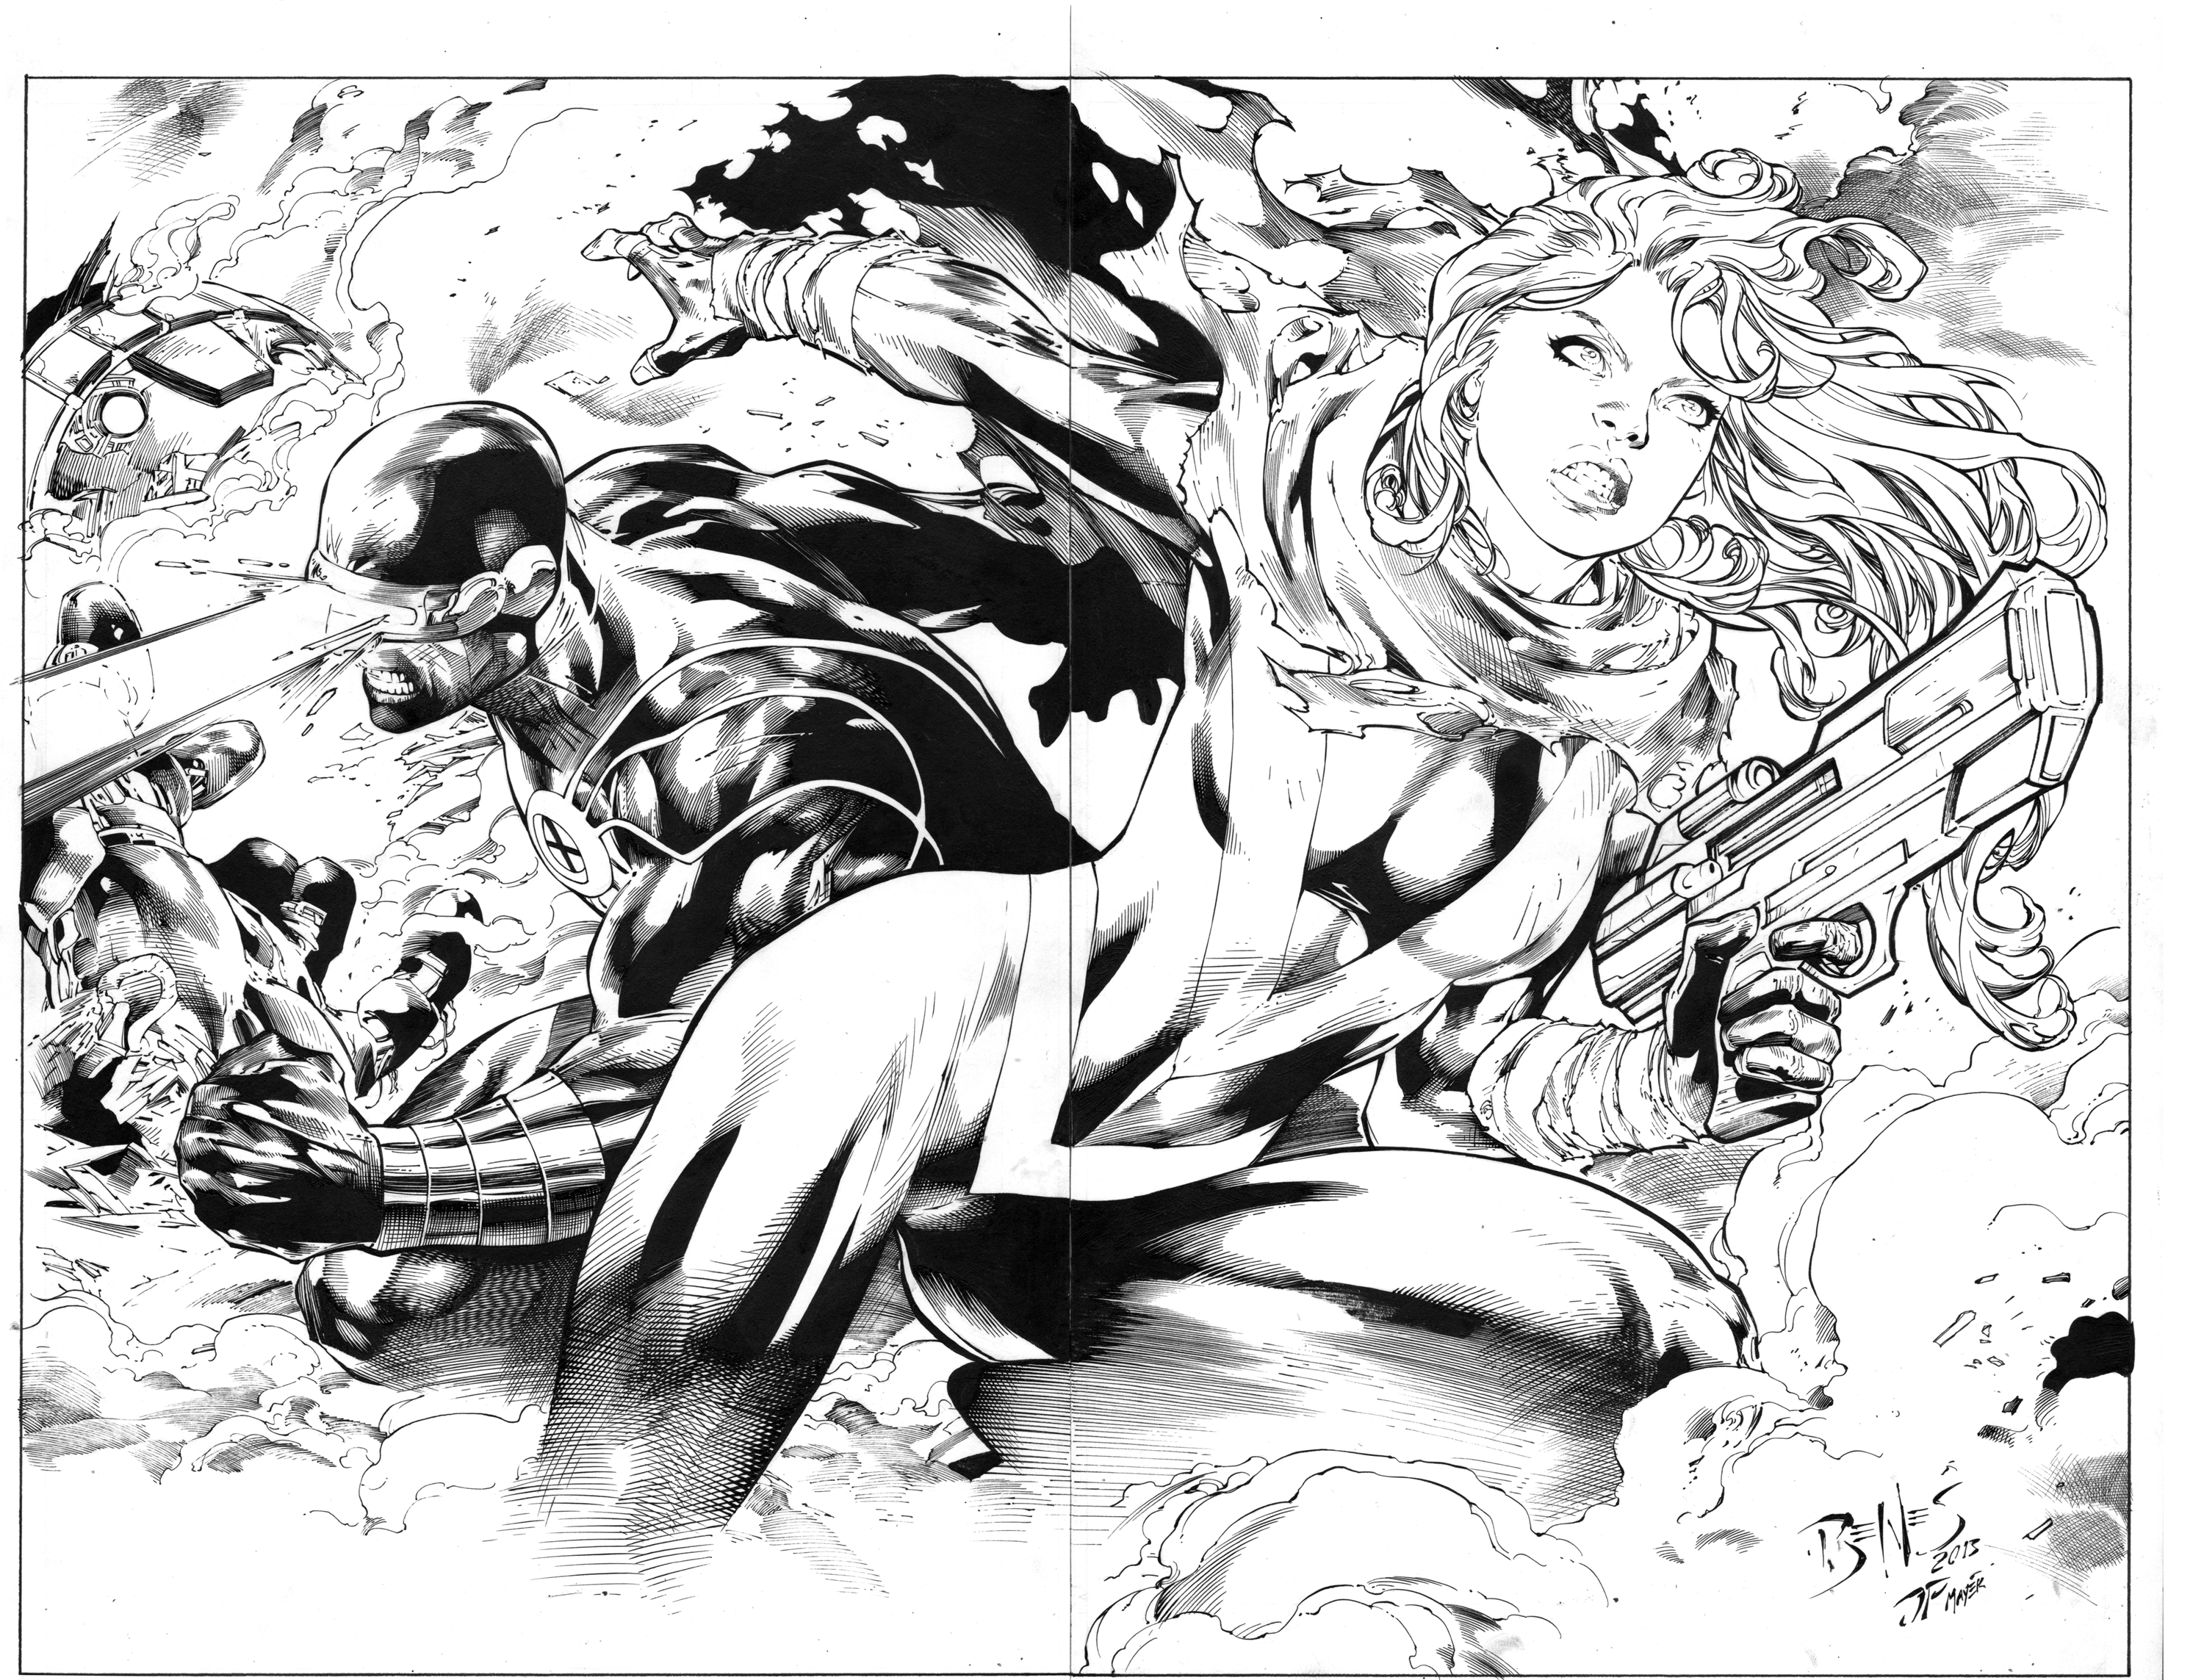 Inks on Ed Benes Pin-Up